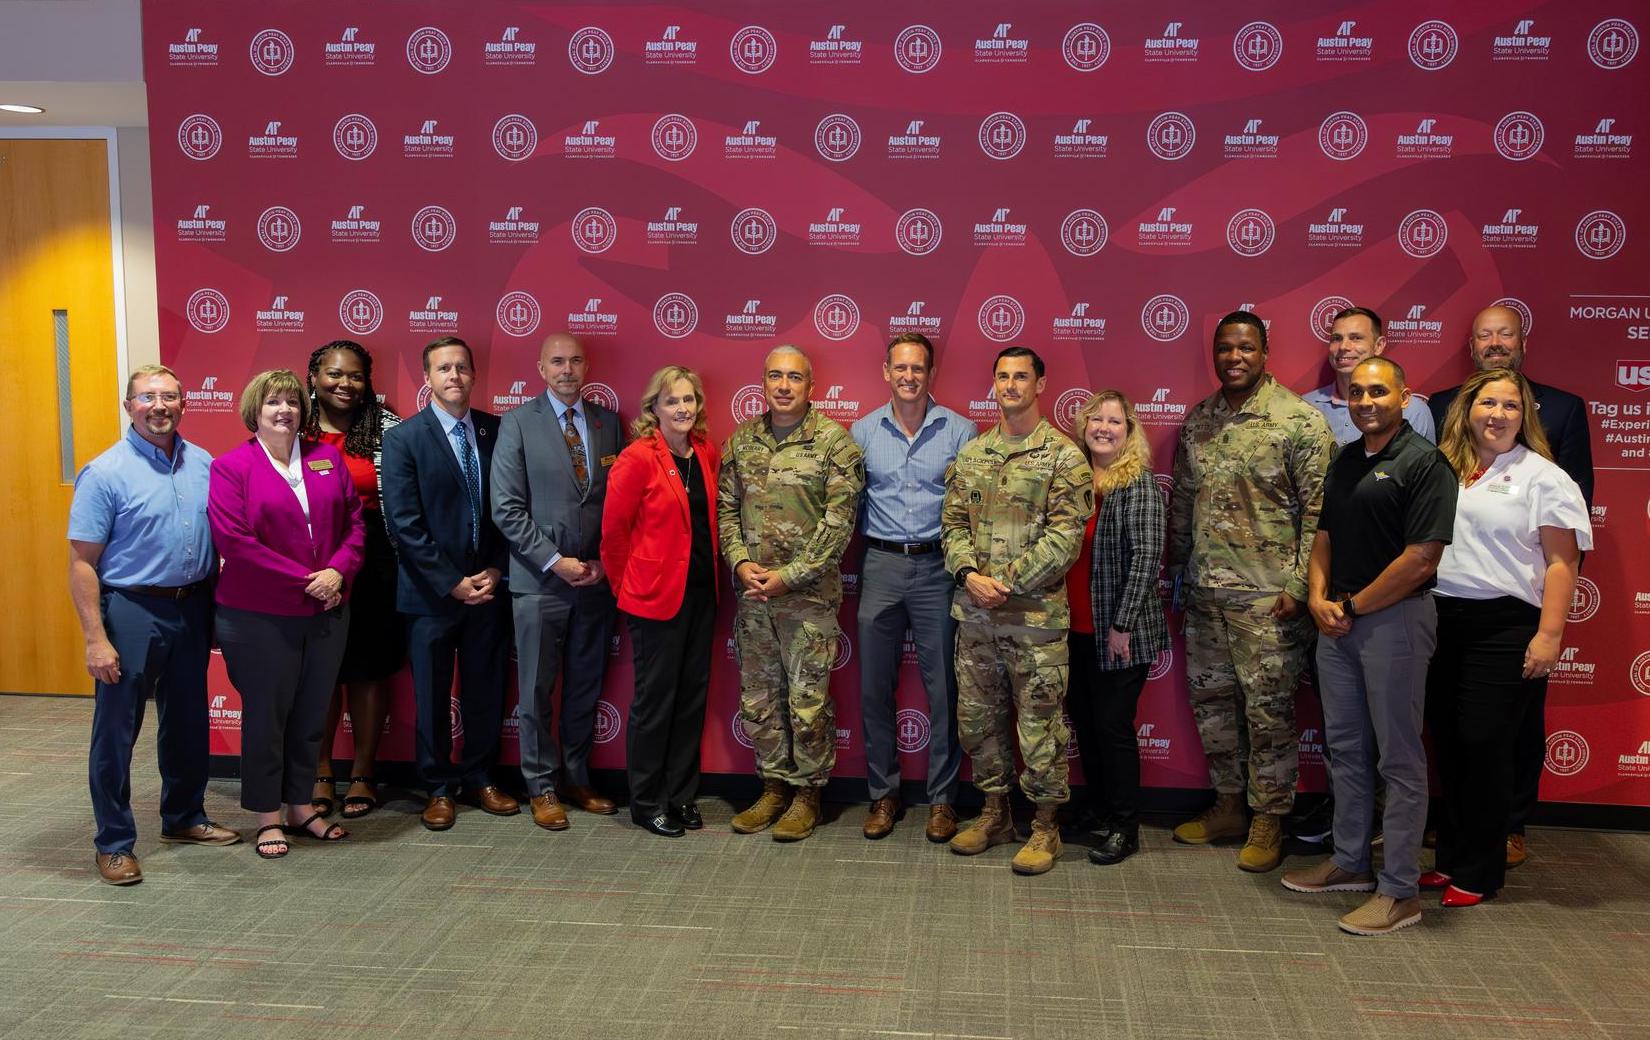 APSU and Fort Campbell leaders in the Morgan University Center.